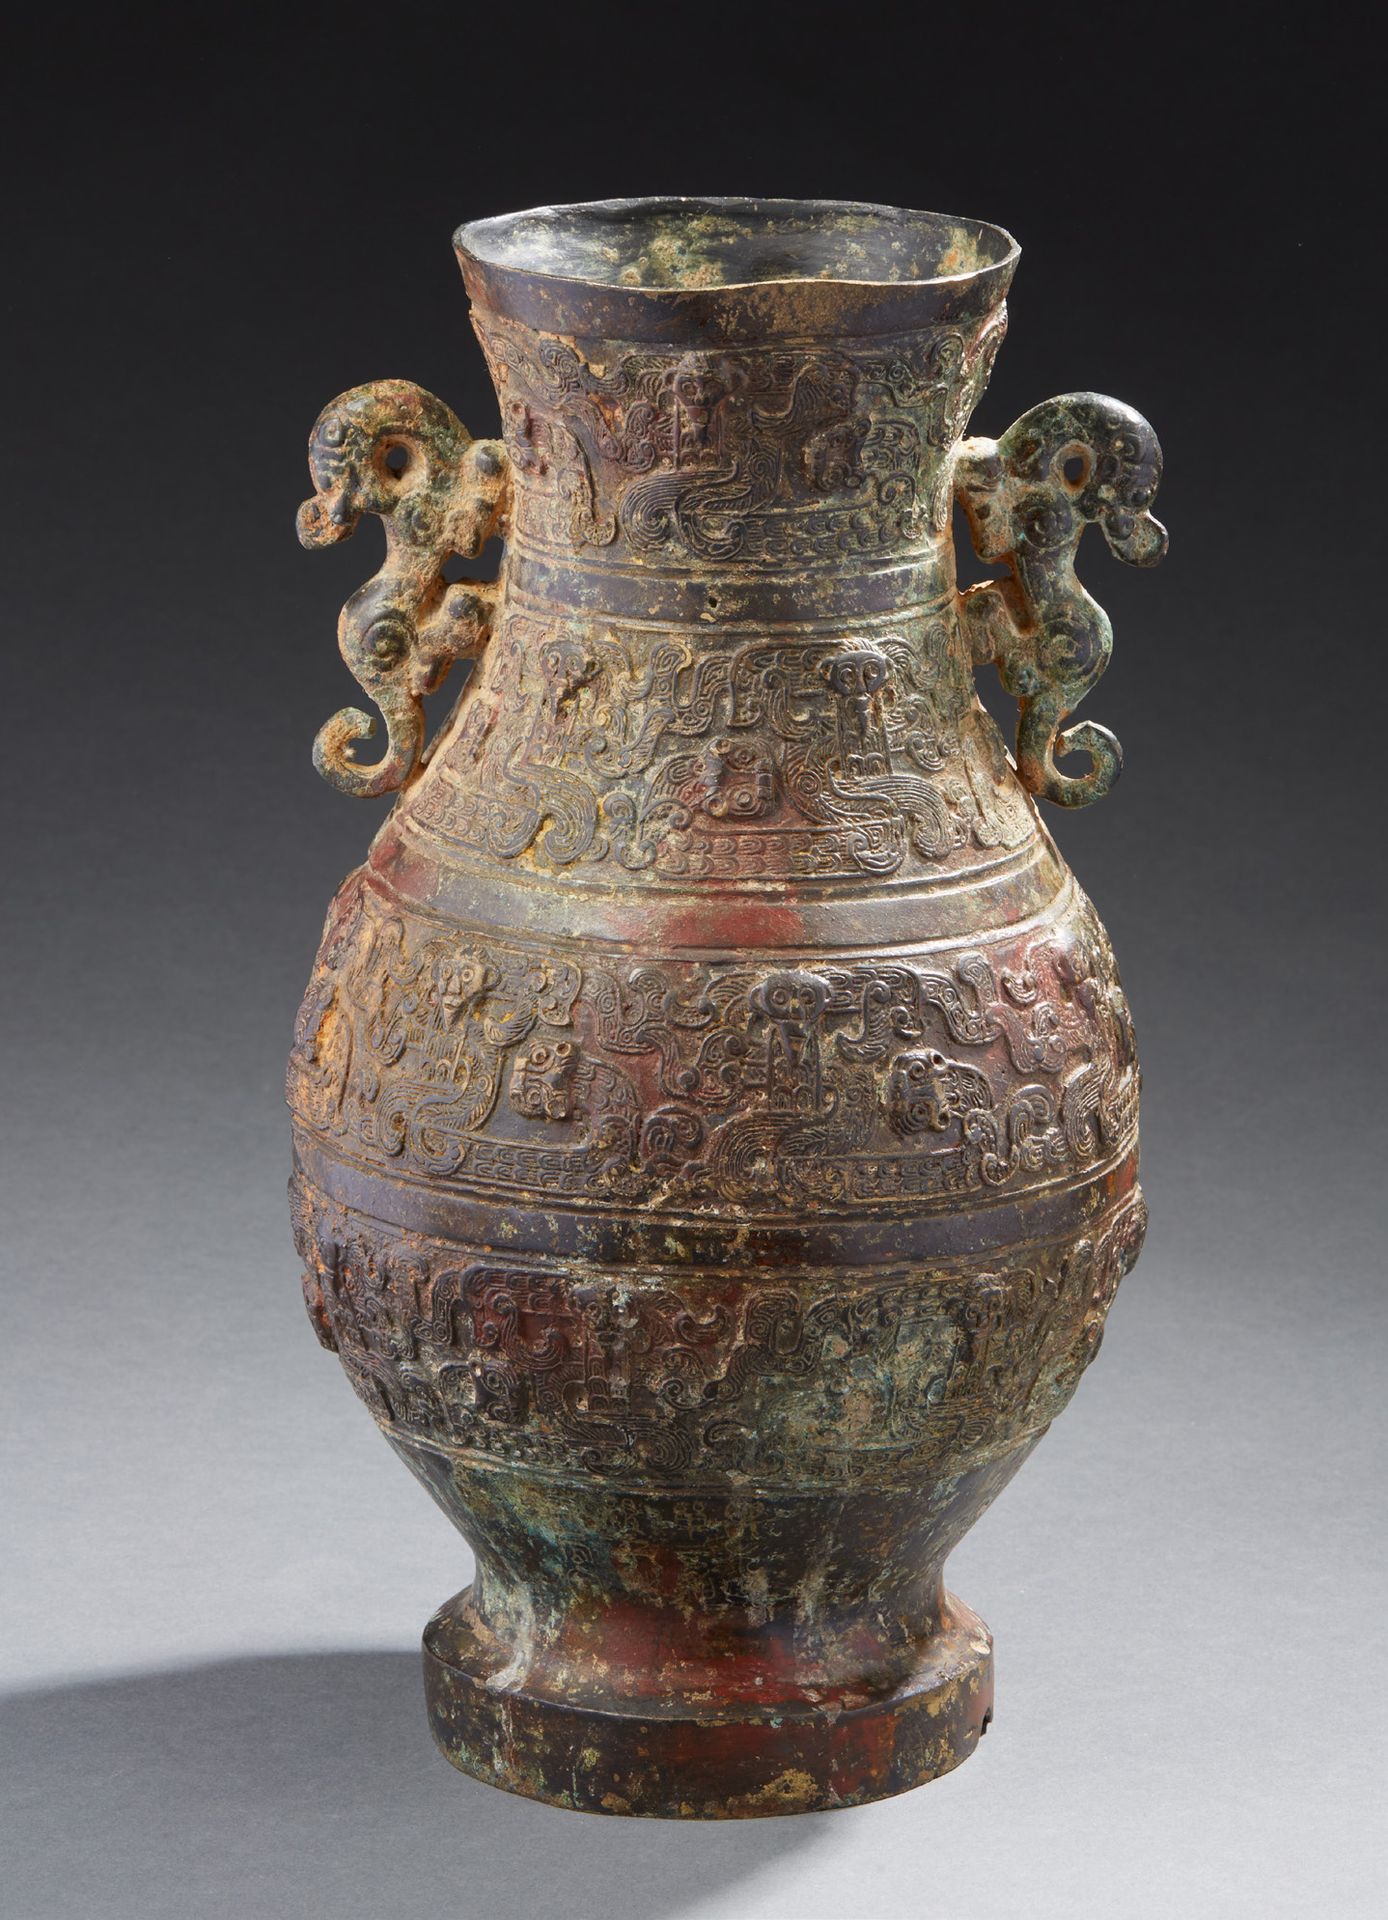 CHINE A bronze vase with a reddish-brown and green patina decorated in slight re&hellip;